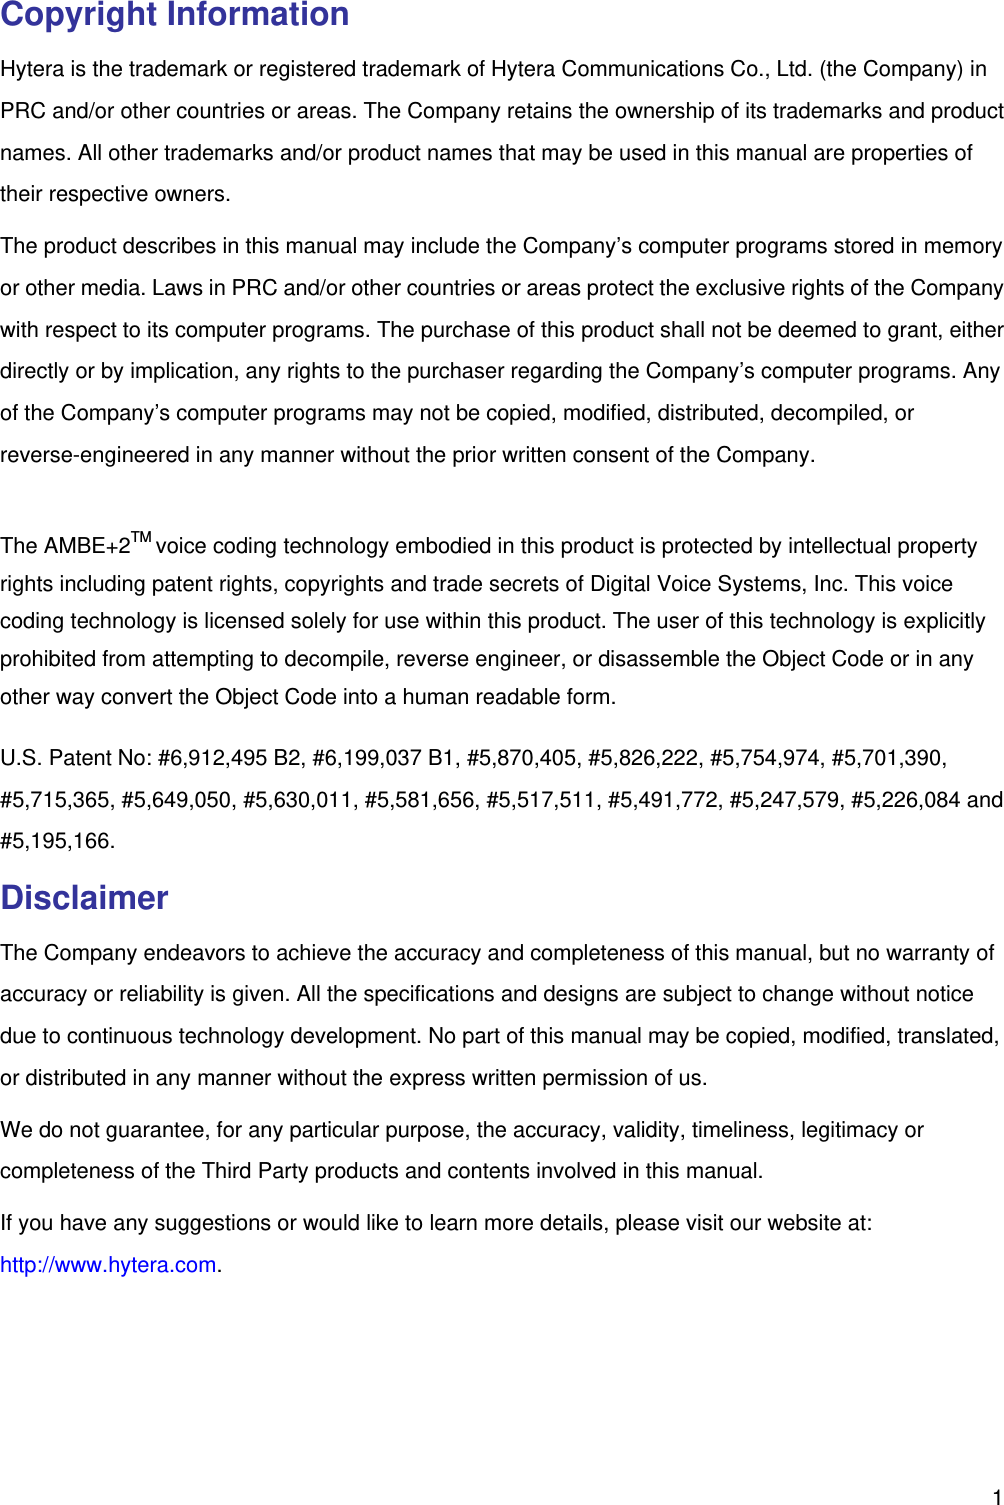   1Copyright Information Hytera is the trademark or registered trademark of Hytera Communications Co., Ltd. (the Company) in PRC and/or other countries or areas. The Company retains the ownership of its trademarks and product names. All other trademarks and/or product names that may be used in this manual are properties of their respective owners.   The product describes in this manual may include the Company’s computer programs stored in memory or other media. Laws in PRC and/or other countries or areas protect the exclusive rights of the Company with respect to its computer programs. The purchase of this product shall not be deemed to grant, either directly or by implication, any rights to the purchaser regarding the Company’s computer programs. Any of the Company’s computer programs may not be copied, modified, distributed, decompiled, or reverse-engineered in any manner without the prior written consent of the Company.    The AMBE+2TM voice coding technology embodied in this product is protected by intellectual property rights including patent rights, copyrights and trade secrets of Digital Voice Systems, Inc. This voice coding technology is licensed solely for use within this product. The user of this technology is explicitly prohibited from attempting to decompile, reverse engineer, or disassemble the Object Code or in any other way convert the Object Code into a human readable form.   U.S. Patent No: #6,912,495 B2, #6,199,037 B1, #5,870,405, #5,826,222, #5,754,974, #5,701,390, #5,715,365, #5,649,050, #5,630,011, #5,581,656, #5,517,511, #5,491,772, #5,247,579, #5,226,084 and #5,195,166. Disclaimer The Company endeavors to achieve the accuracy and completeness of this manual, but no warranty of accuracy or reliability is given. All the specifications and designs are subject to change without notice due to continuous technology development. No part of this manual may be copied, modified, translated, or distributed in any manner without the express written permission of us.   We do not guarantee, for any particular purpose, the accuracy, validity, timeliness, legitimacy or completeness of the Third Party products and contents involved in this manual. If you have any suggestions or would like to learn more details, please visit our website at: http://www.hytera.com.  